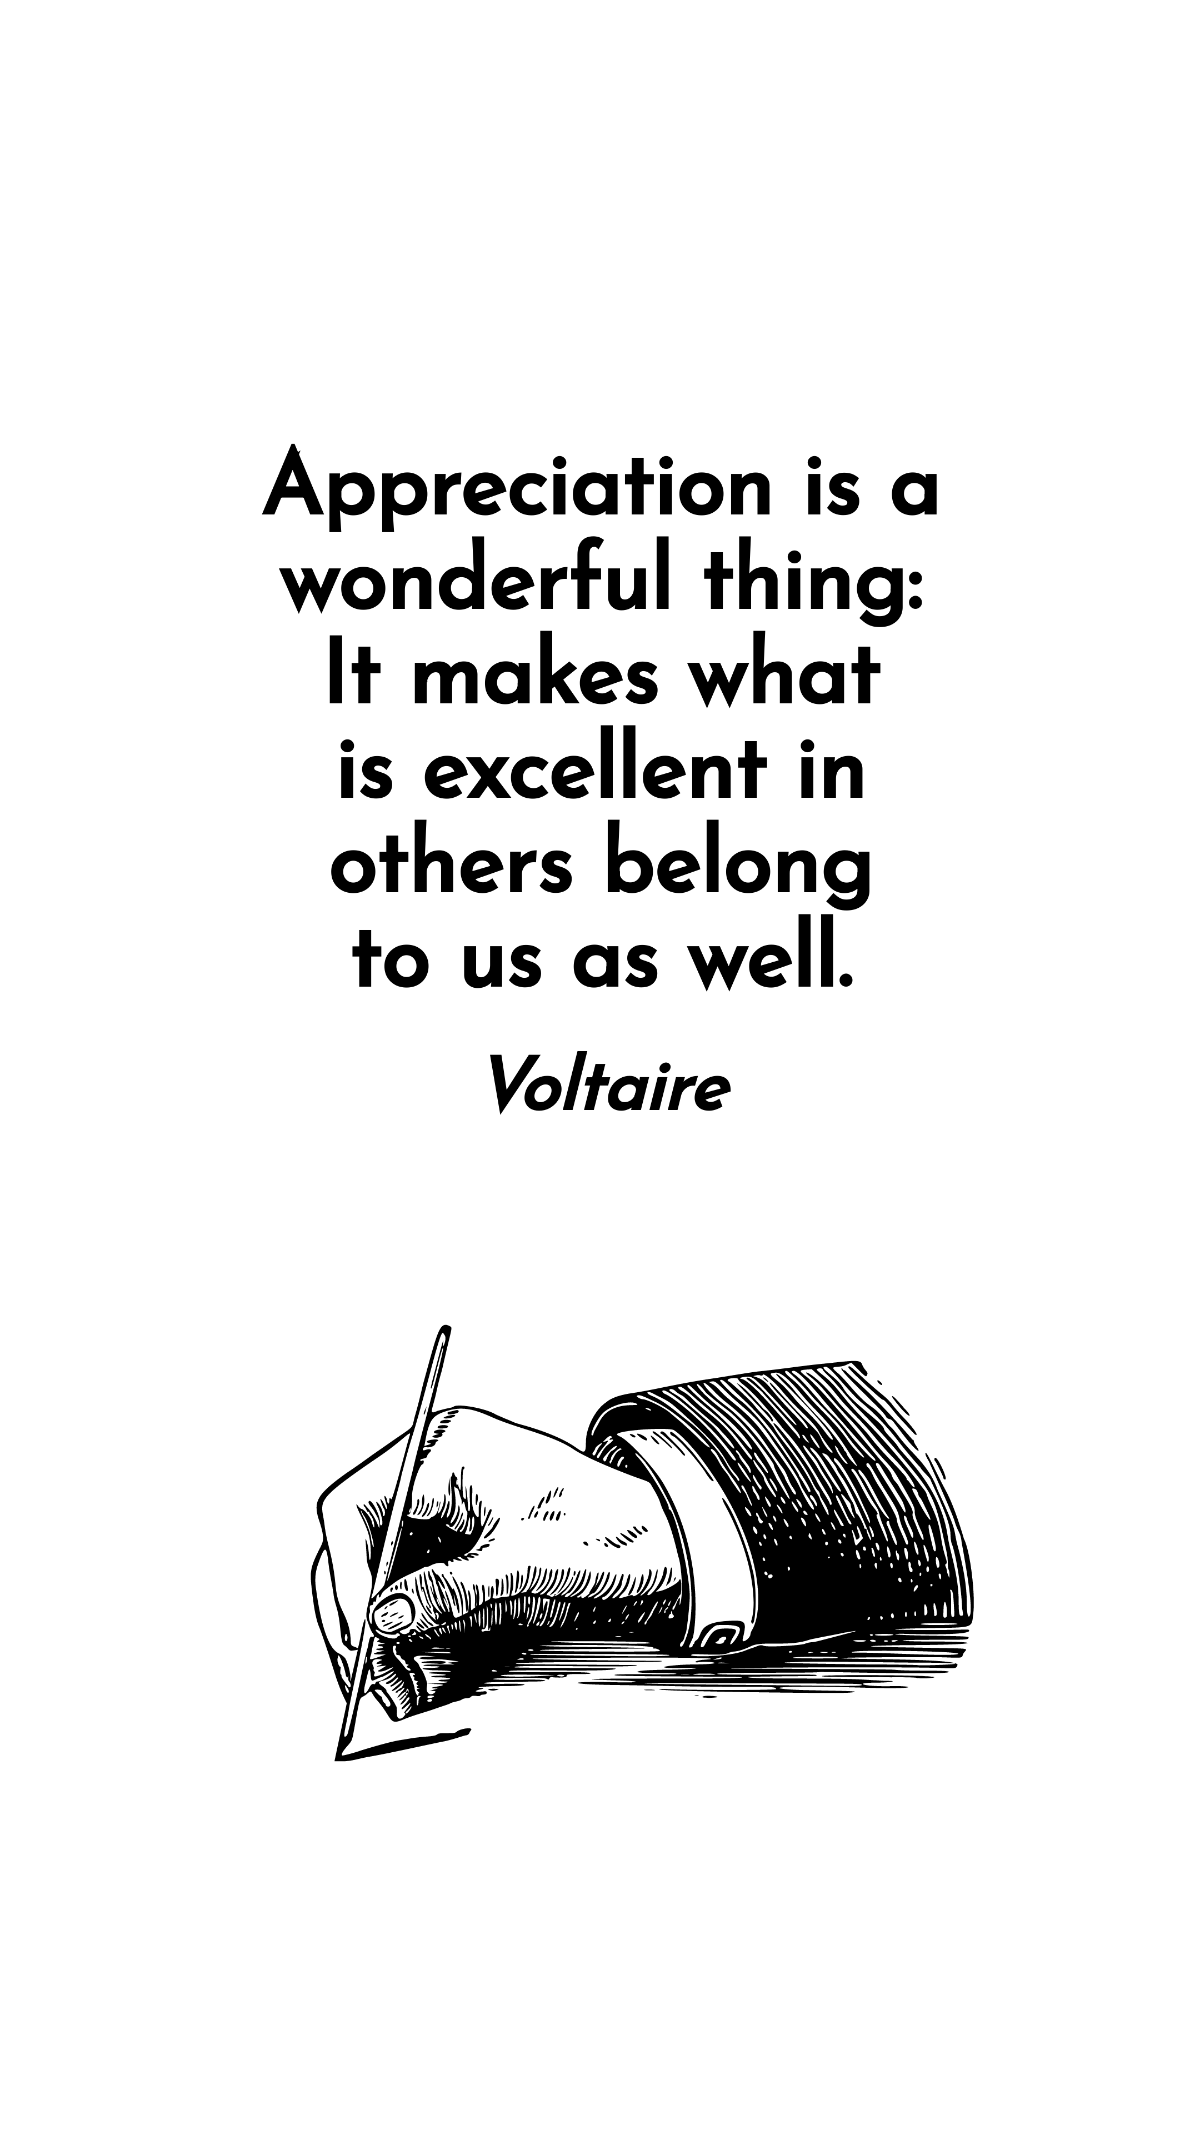 Free Voltaire - Appreciation is a wonderful thing: It makes what is excellent in others belong to us as well. Template